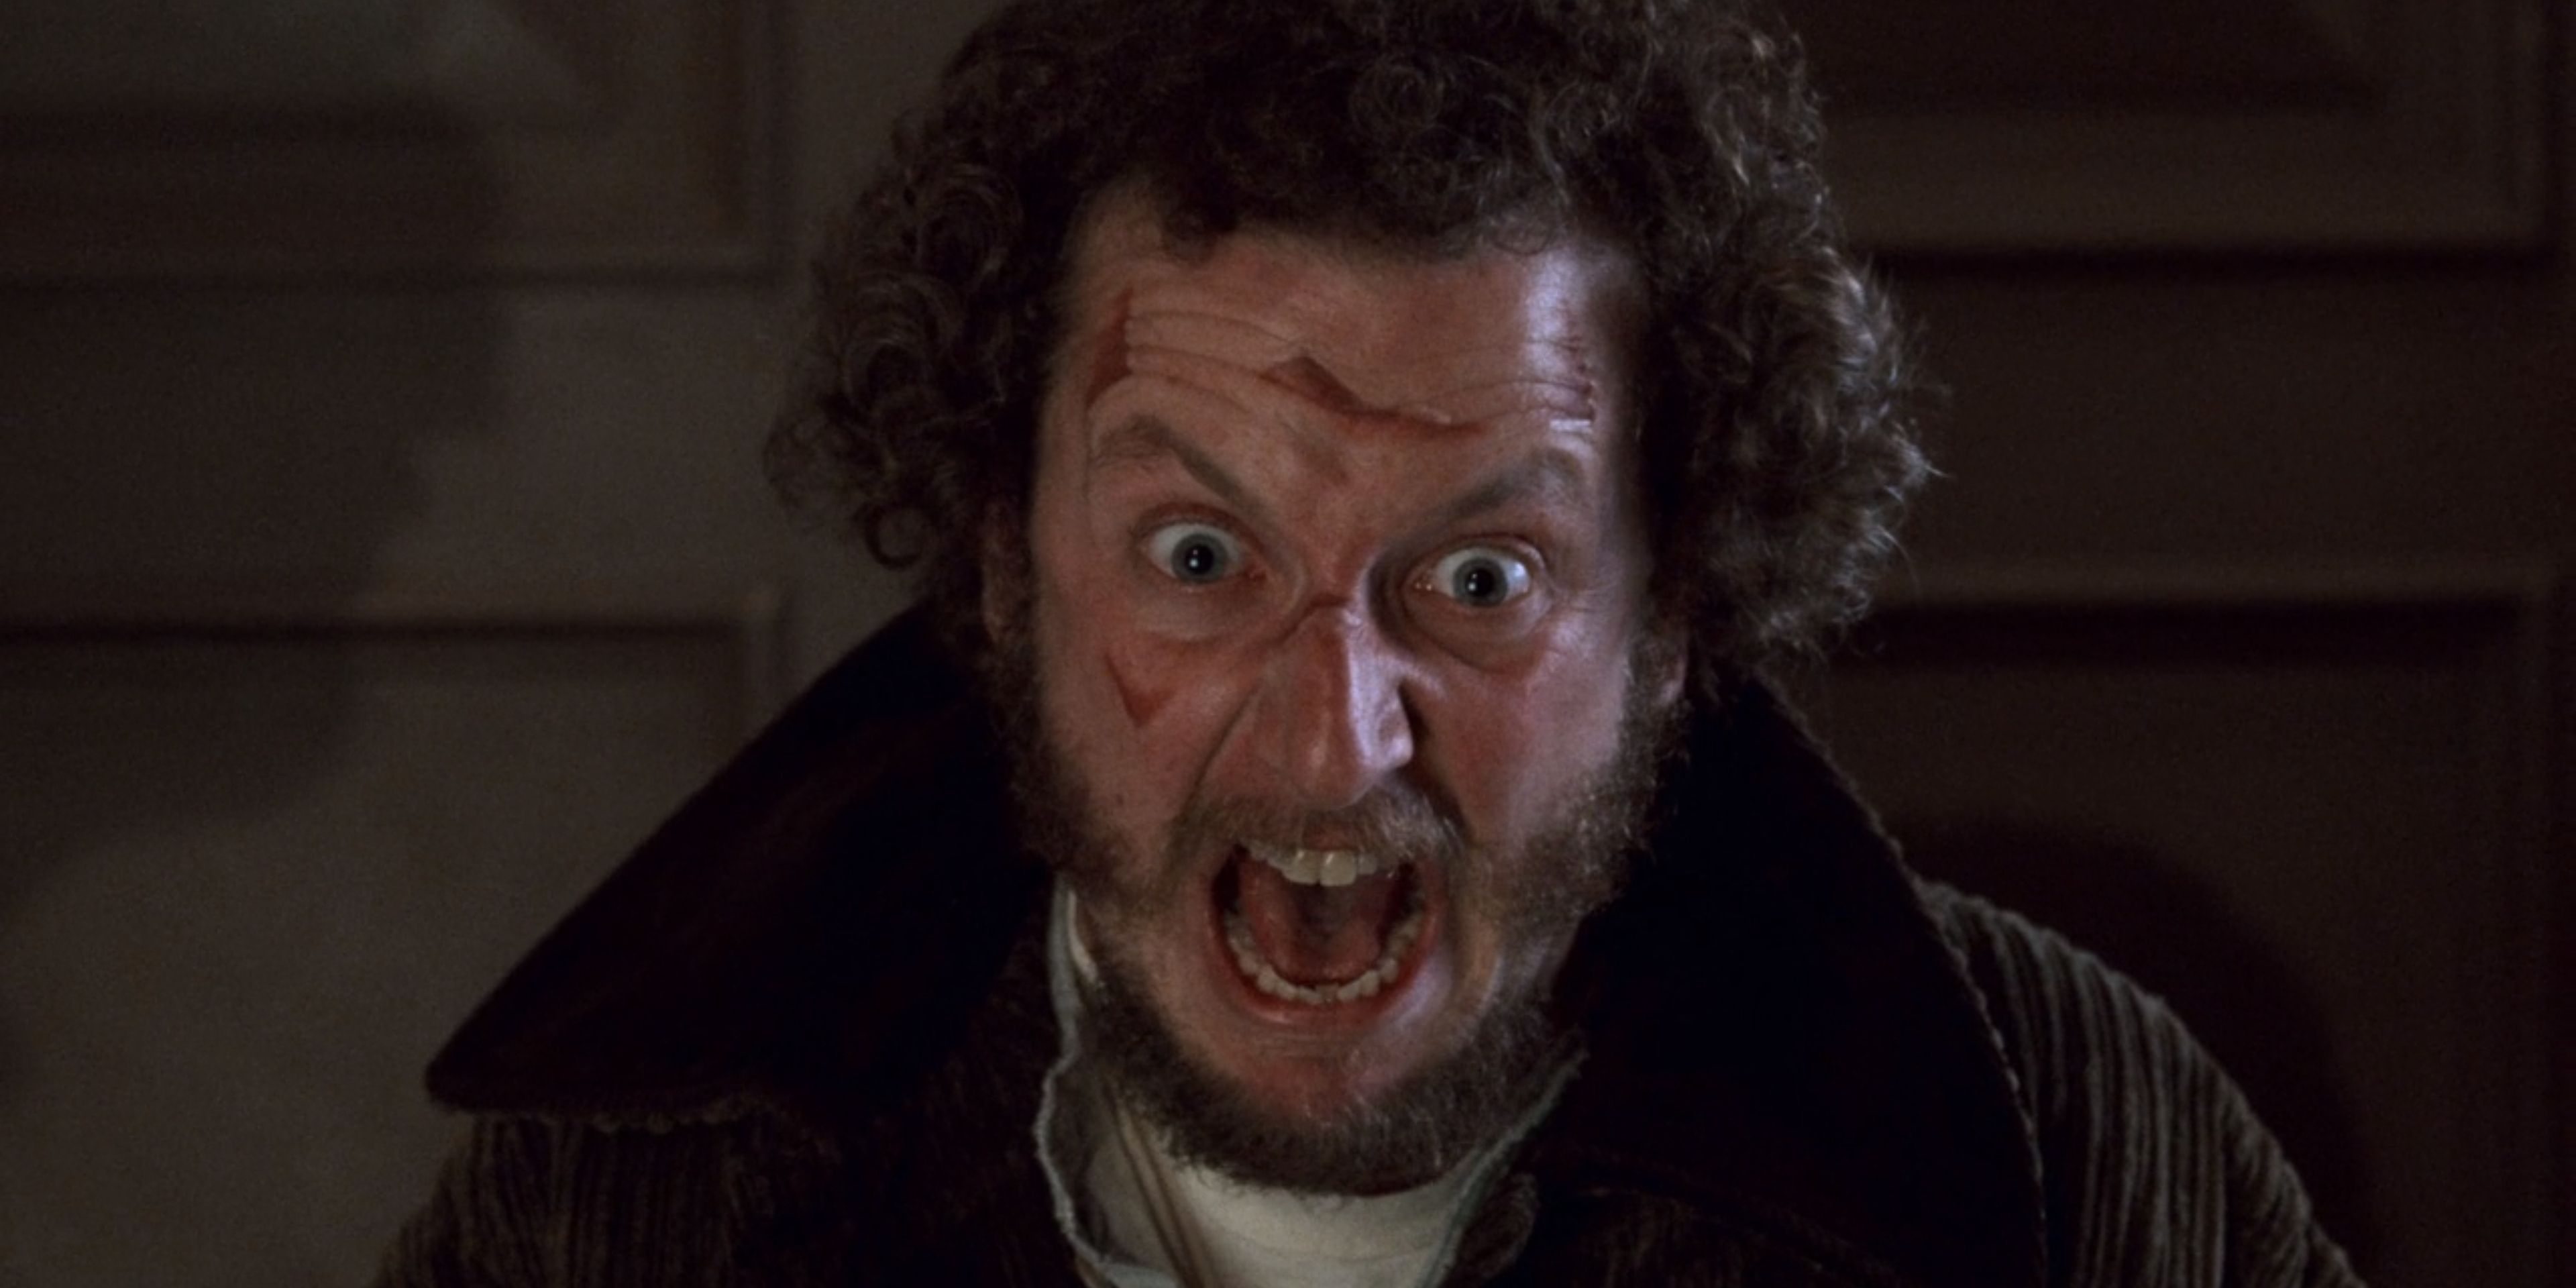 Marv screaming in pain from the staple gun attack in Home Alone 2 Lost In New York (1991)